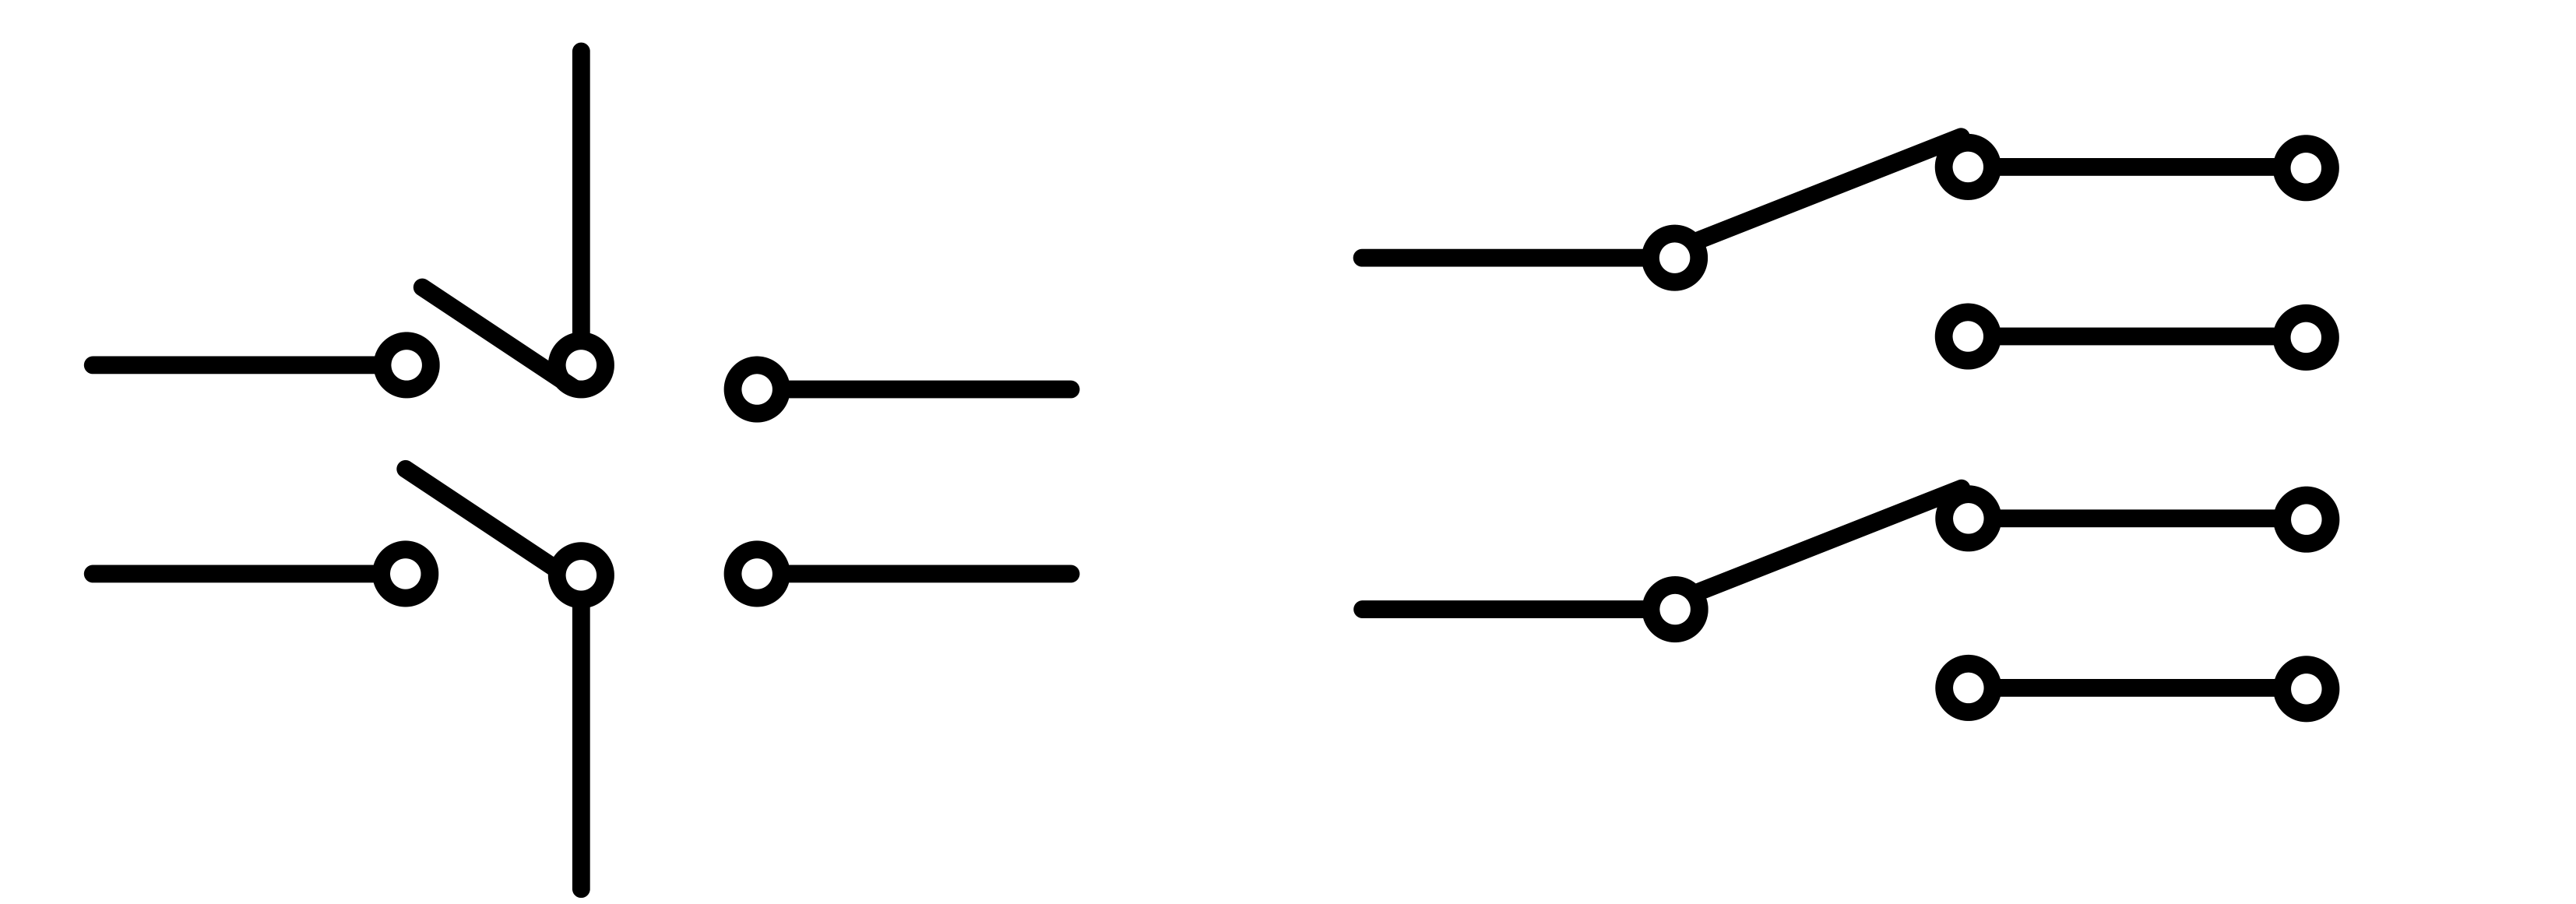 Figure 10: Double Pole Double Throw (DPDT) Switch